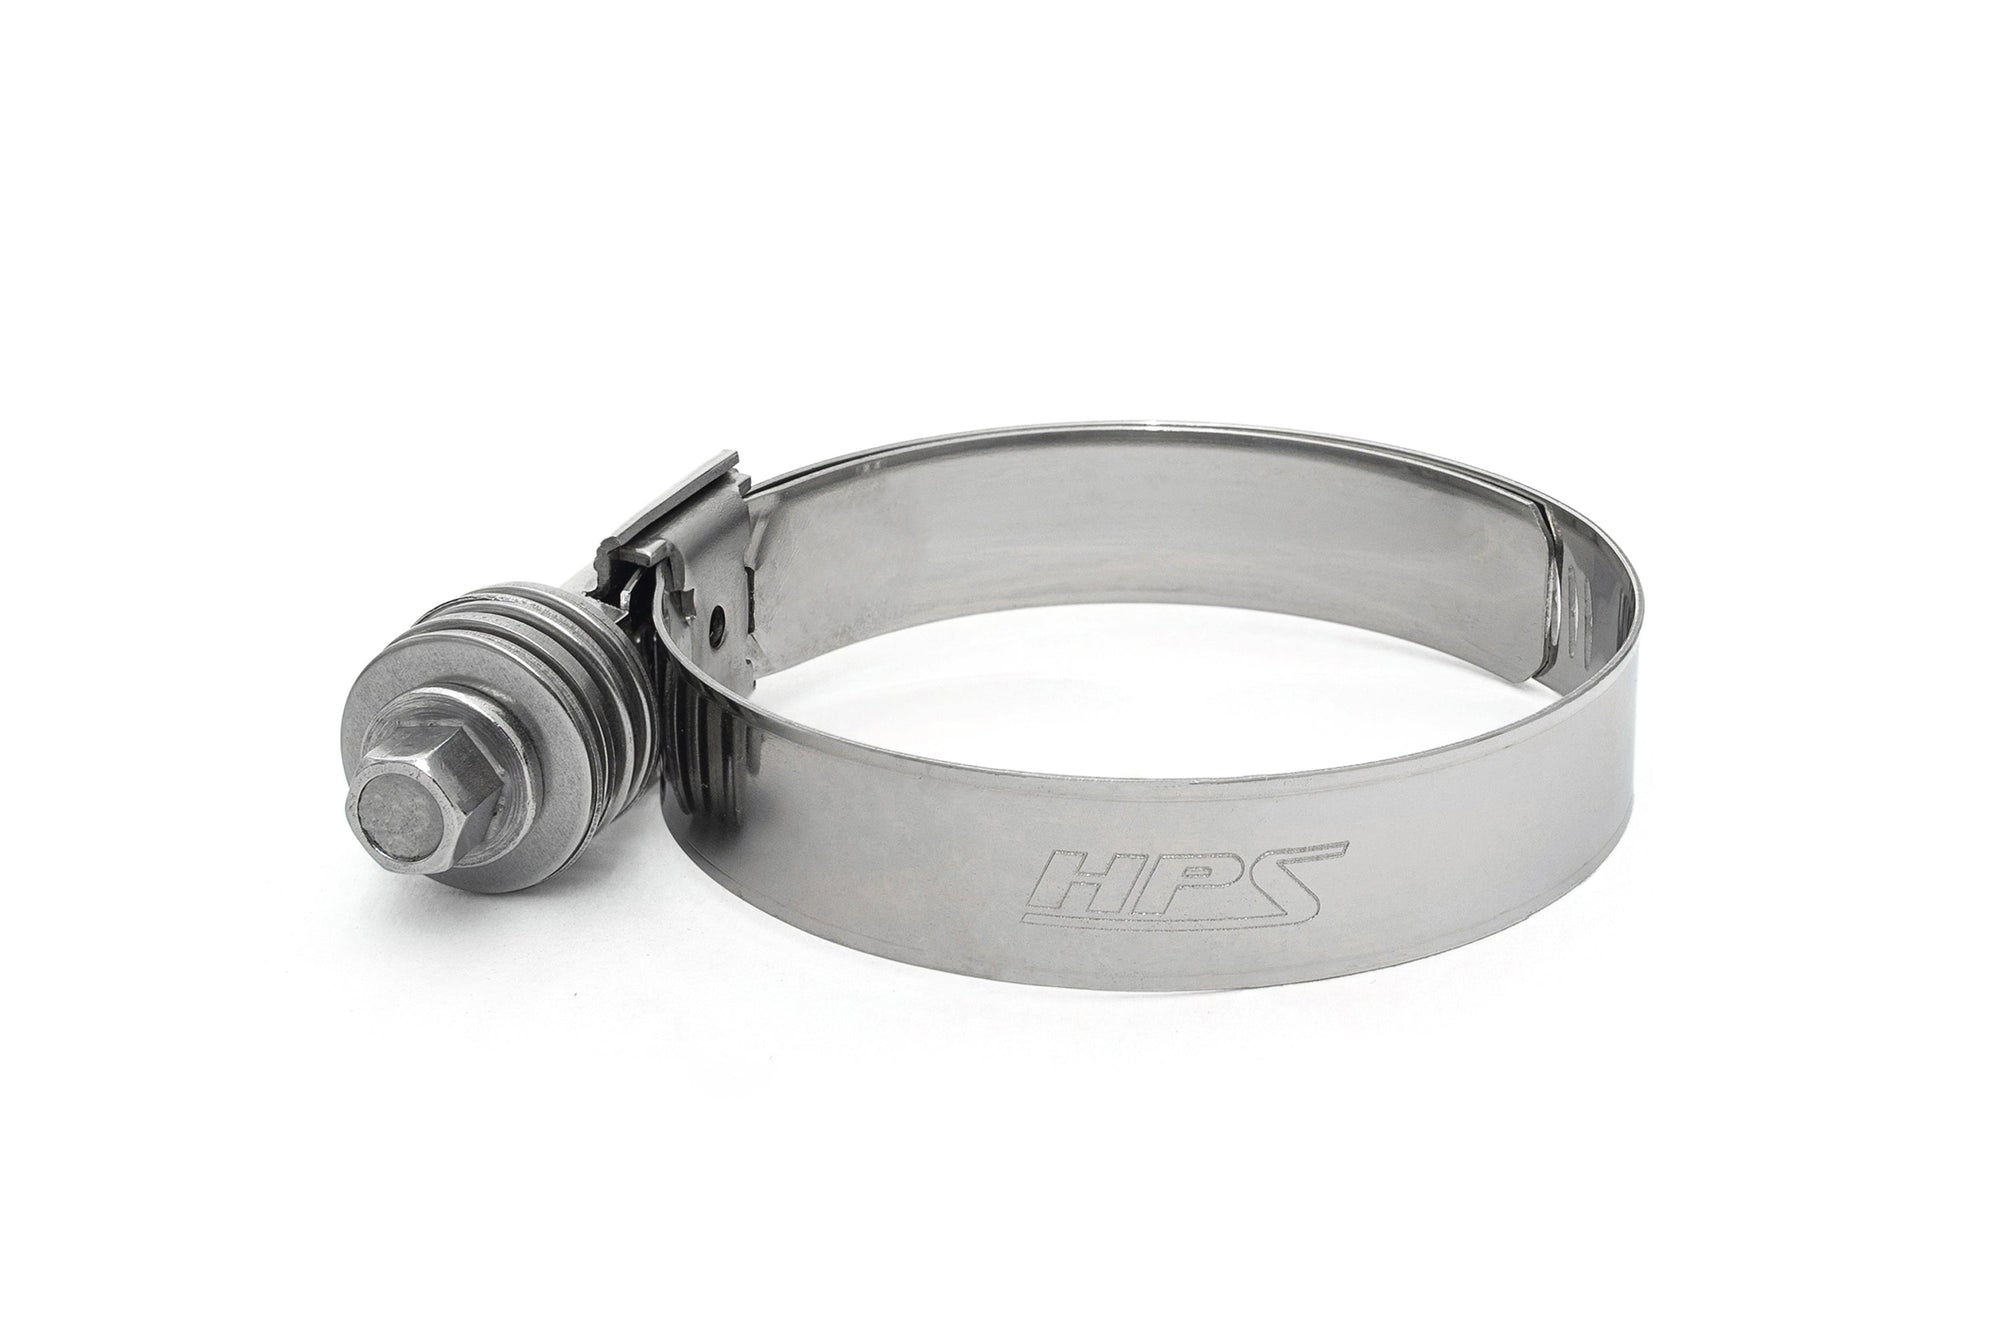 HPS Stainless Steel Heavy Duty Constant Tension Hose Clamp CTHD-450 fits 3-1/2", 3-3/4" inch silicone hose charge air intake turbo cac intercooler pipe